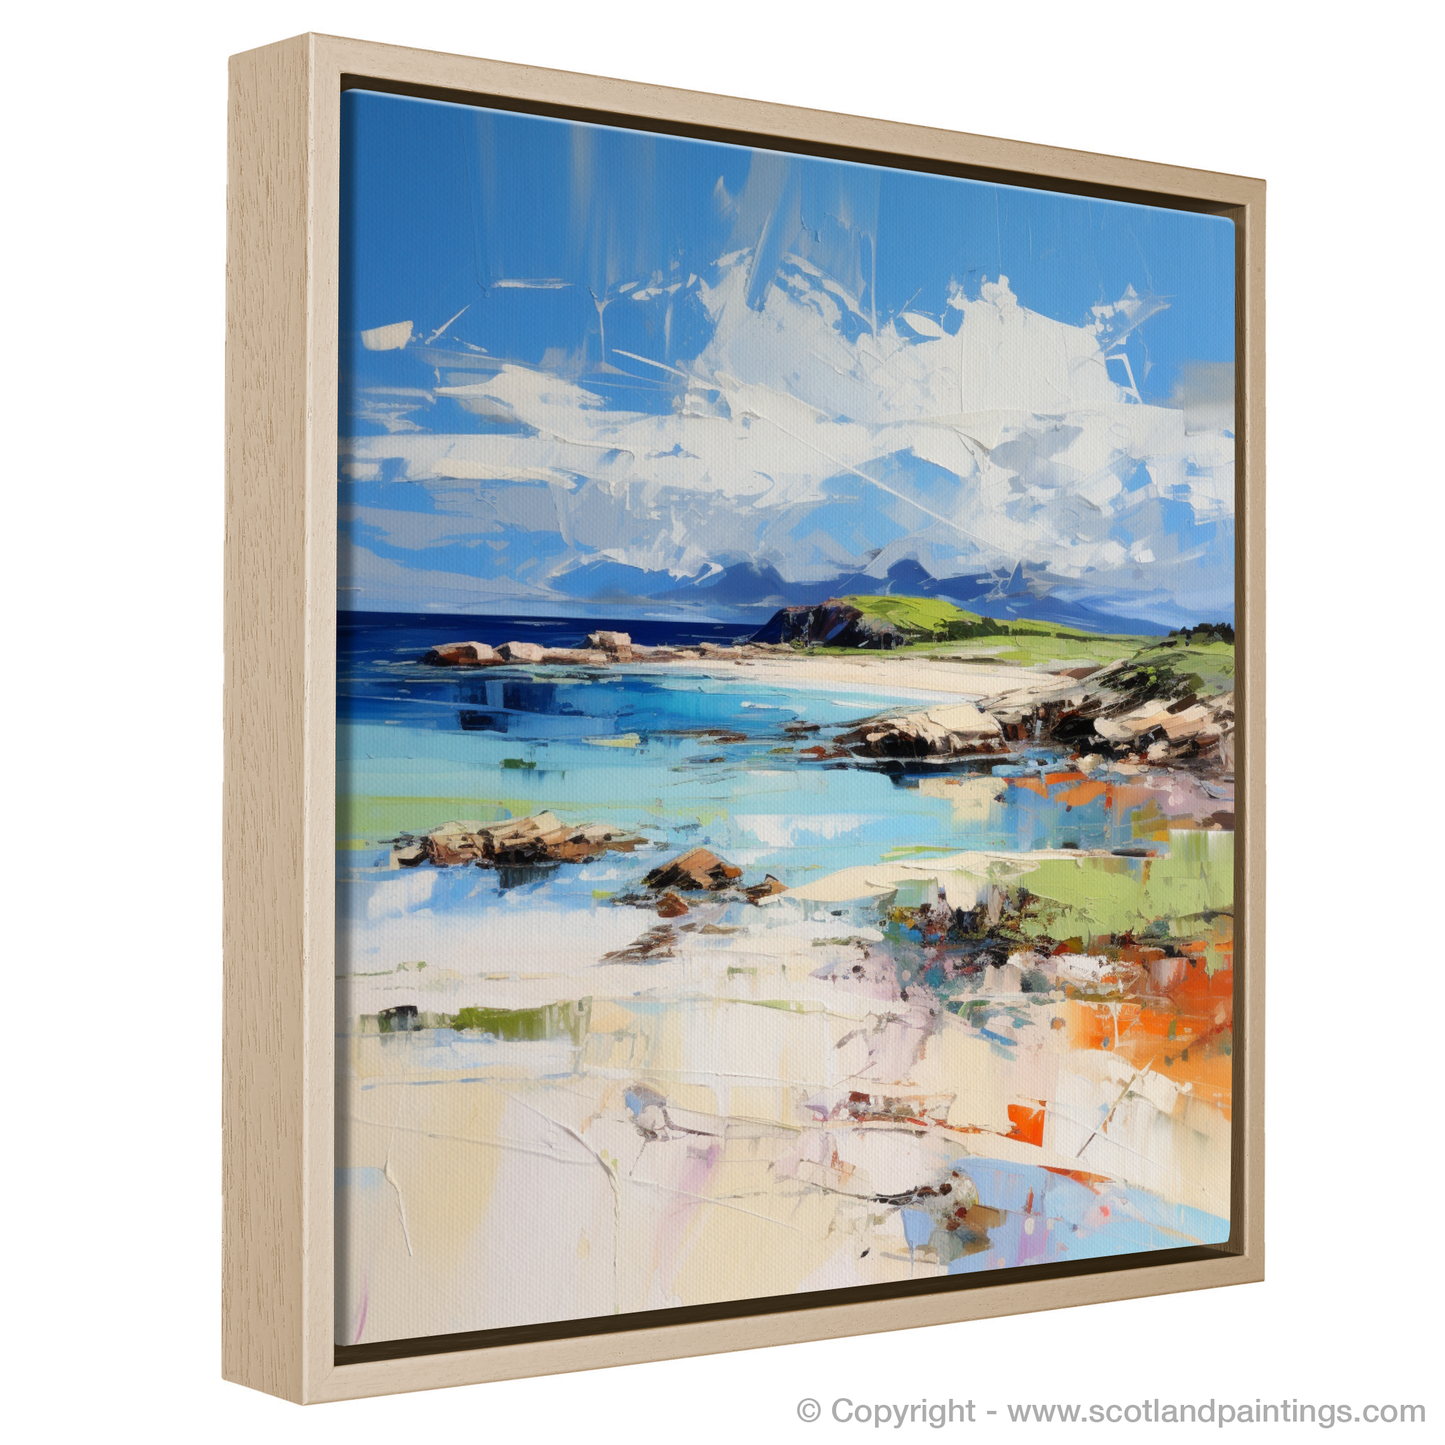 Painting and Art Print of Camusdarach Beach, Arisaig entitled "Expression of Camusdarach: An Eclectic Hebridean Shore".